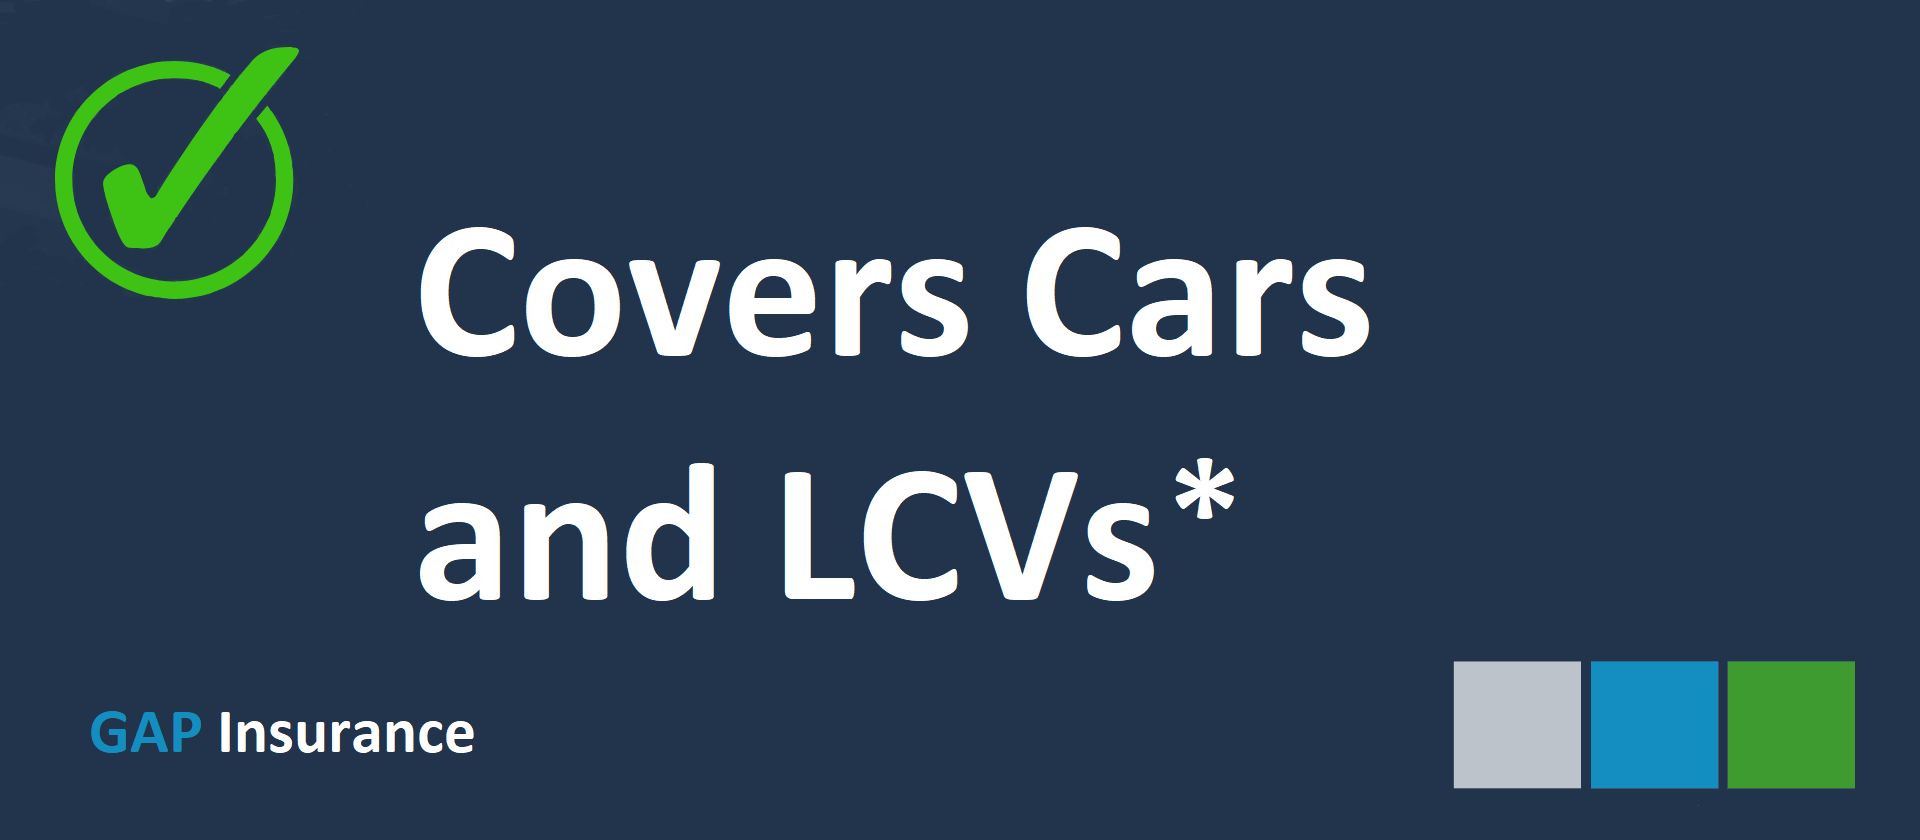 Covers Cars and LCVs